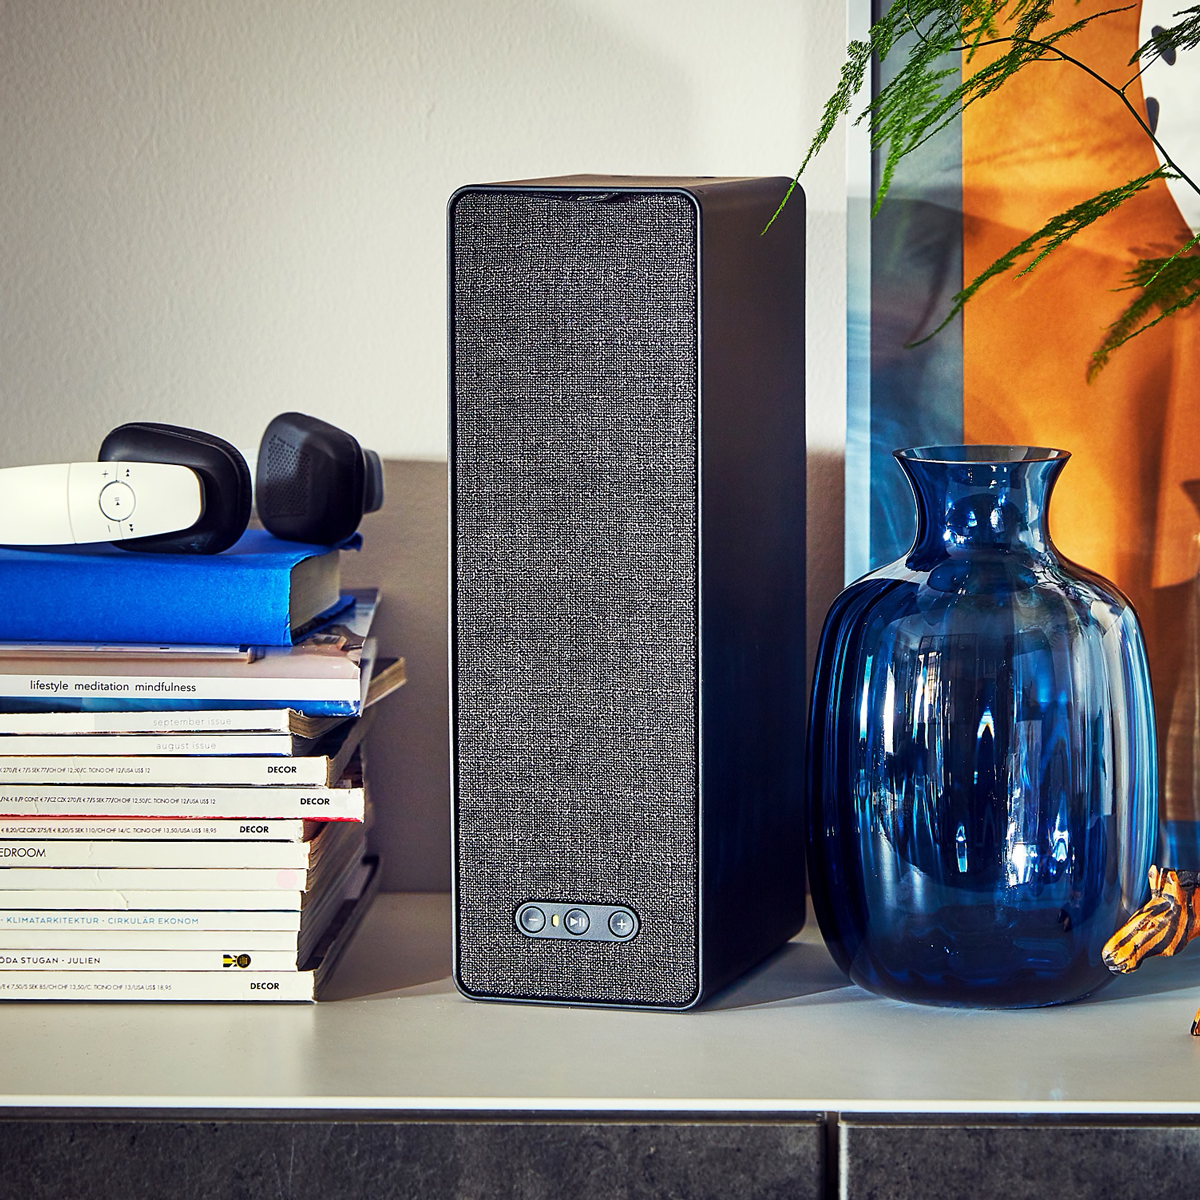 Ikea Symfonisk Airplay 2 Speaker Available In Poland And More